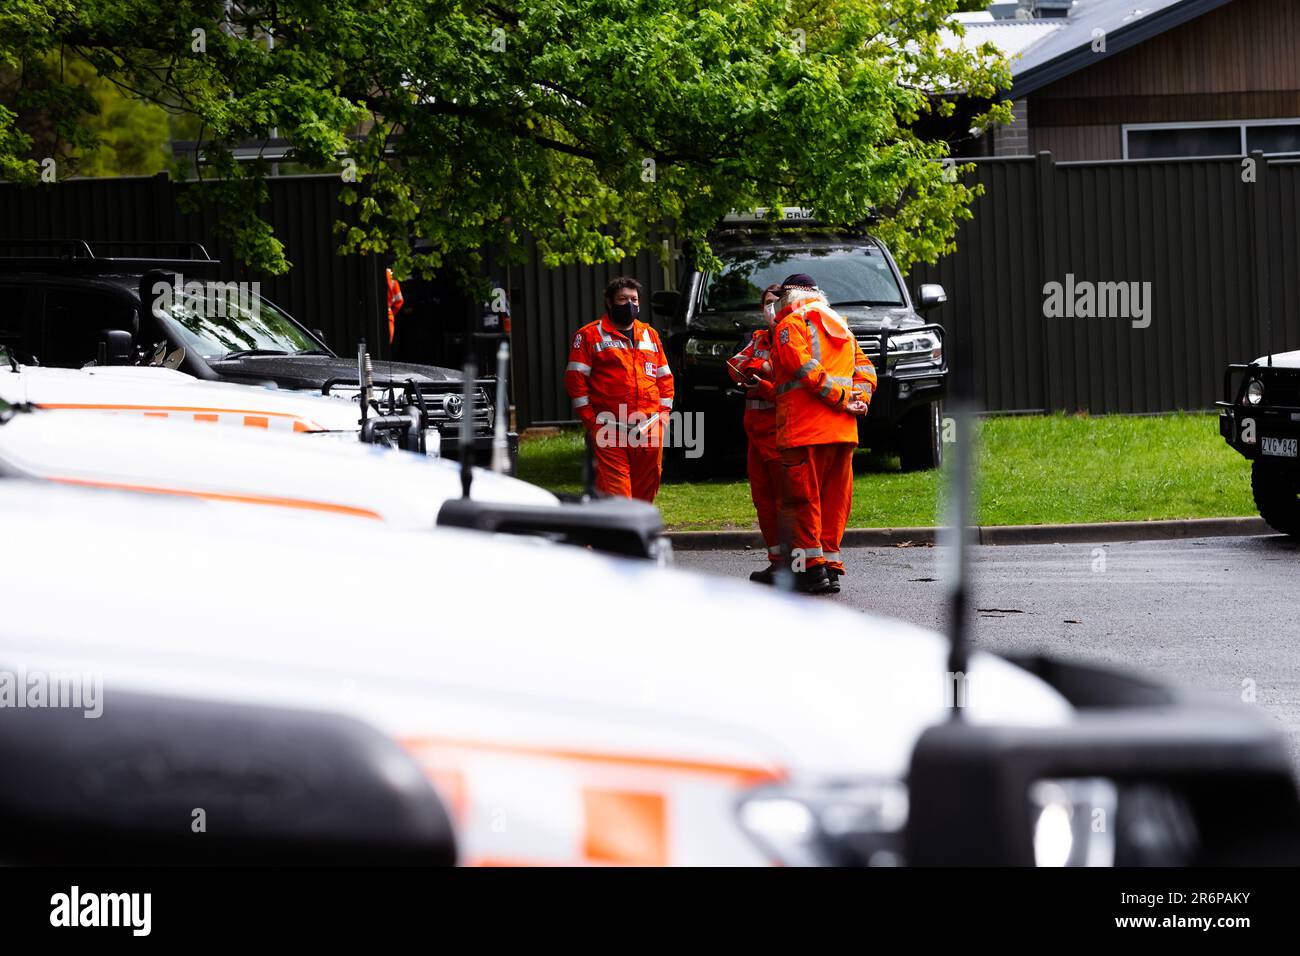 MELBOURNE, VIC - SEPTEMBER 23: Police and SES continue to search for missing 14 year old autistic boy, William Wall after he went missing two days ago in dense bushland on September 23, 2020 in Melbourne, Australia. A massive search in the Yarra Ranges is underway for missing autistic teen who spent the night lost in the bush. Multiple Crews, including police, the Airwing and SES searched for William as temperatures dropped to 7C overnight. Rain is predicted Wednesday and will impact the search efforts. Stock Photo